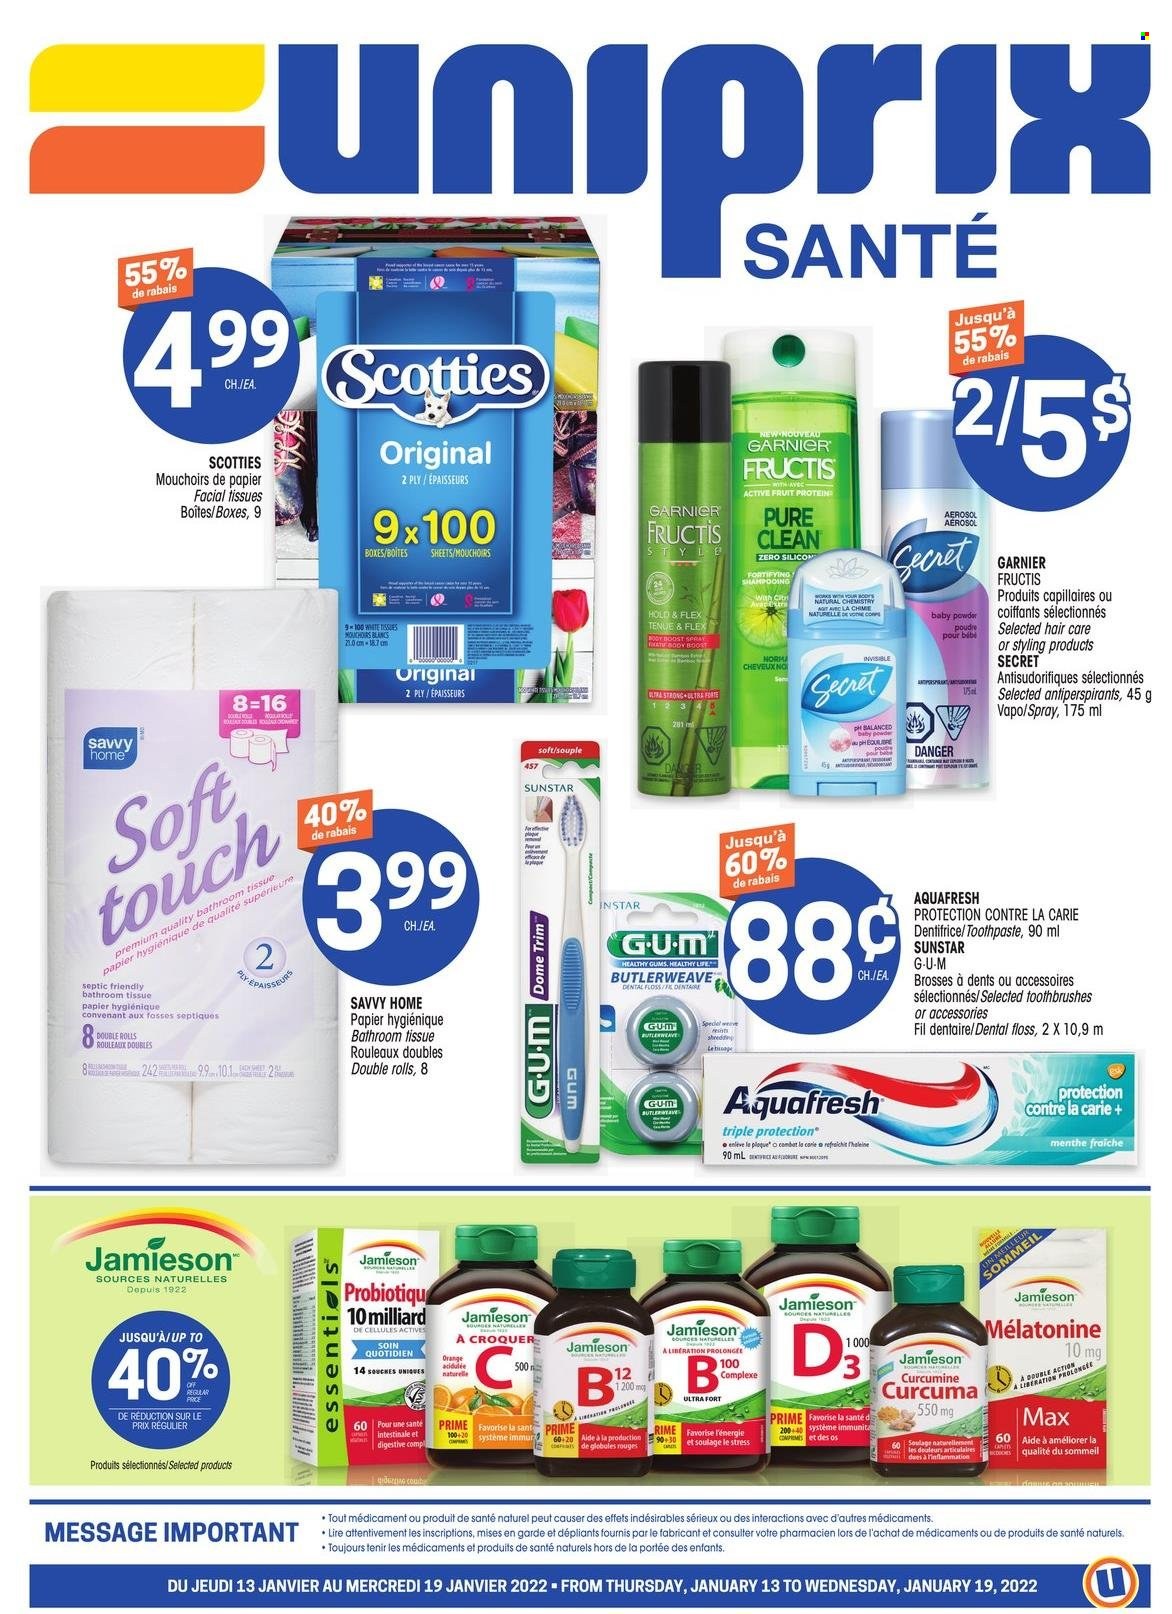 thumbnail - Uniprix Santé Flyer - January 13, 2022 - January 19, 2022 - Sales products - Digestive, baby powder, bath tissue, toothpaste, facial tissues, Fructis, Garnier. Page 1.